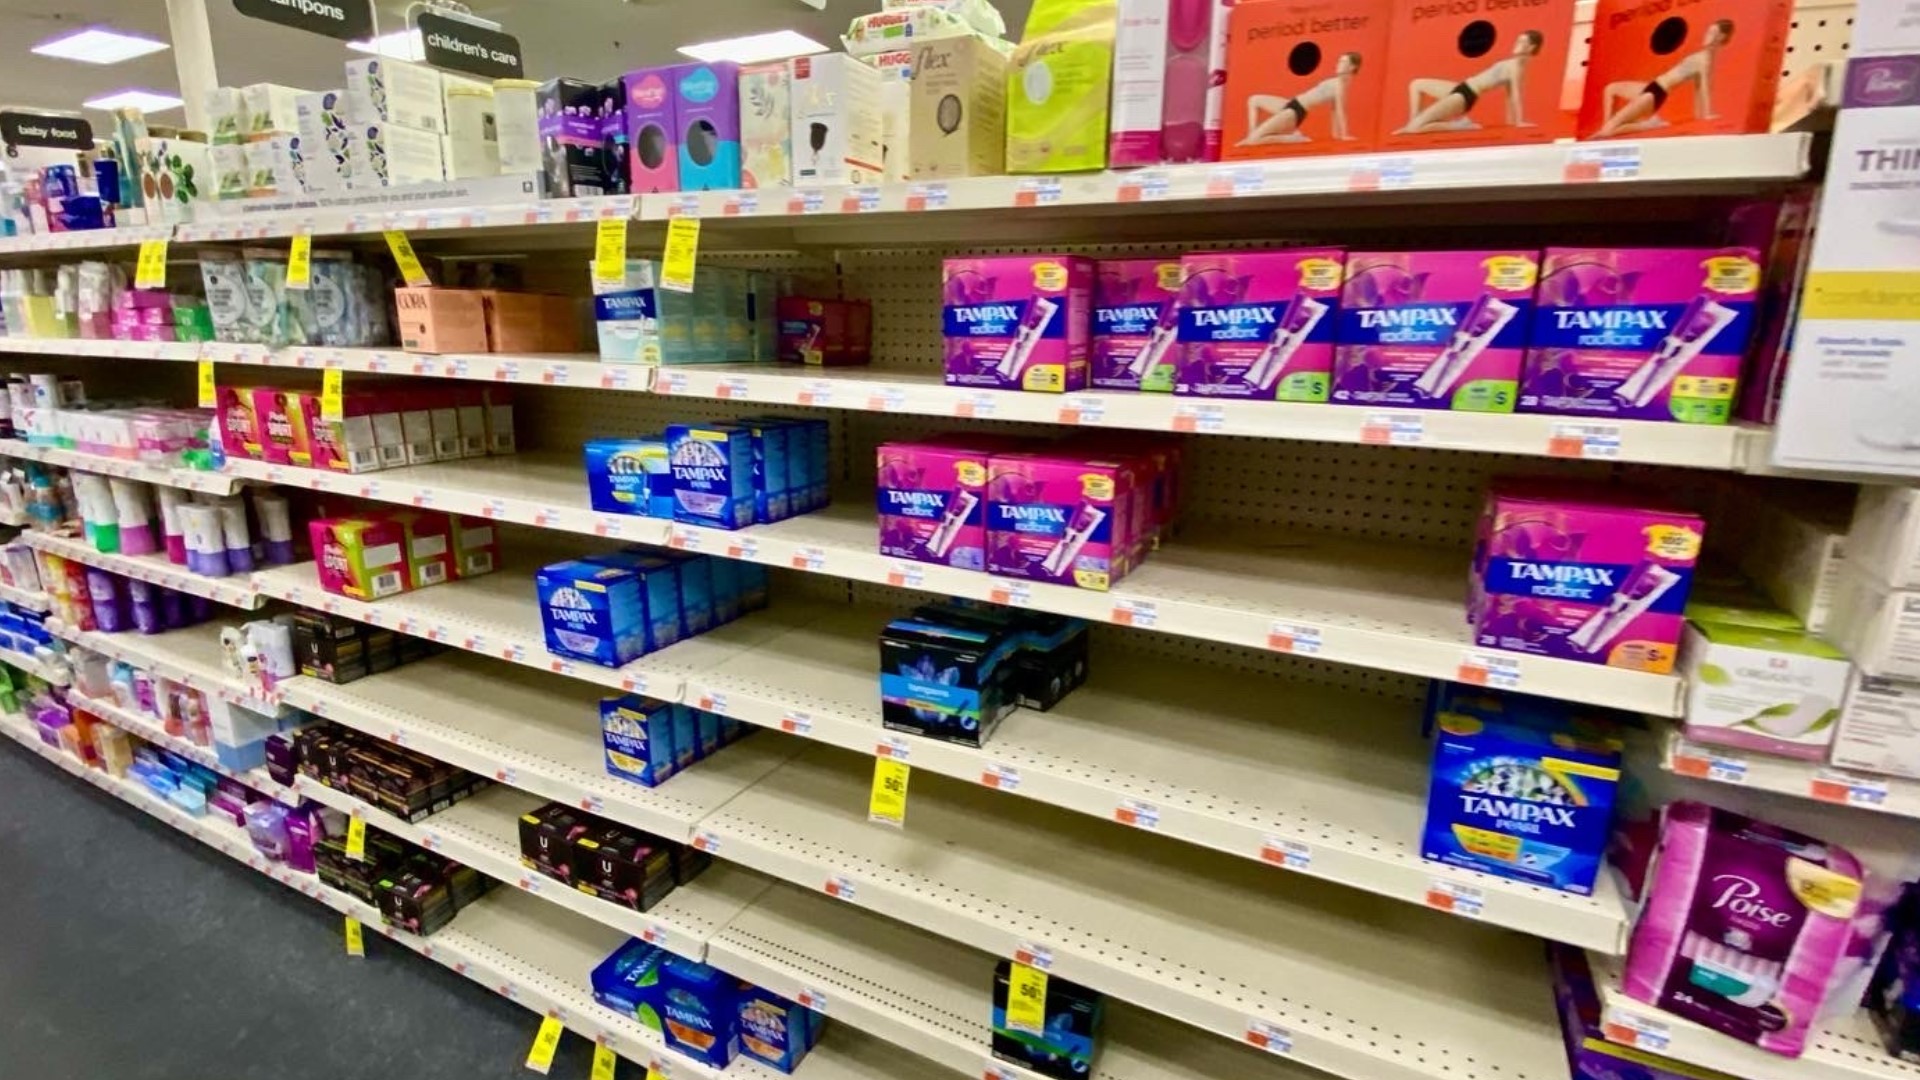 Texas is one of 26 states that charges sales tax on tampons.